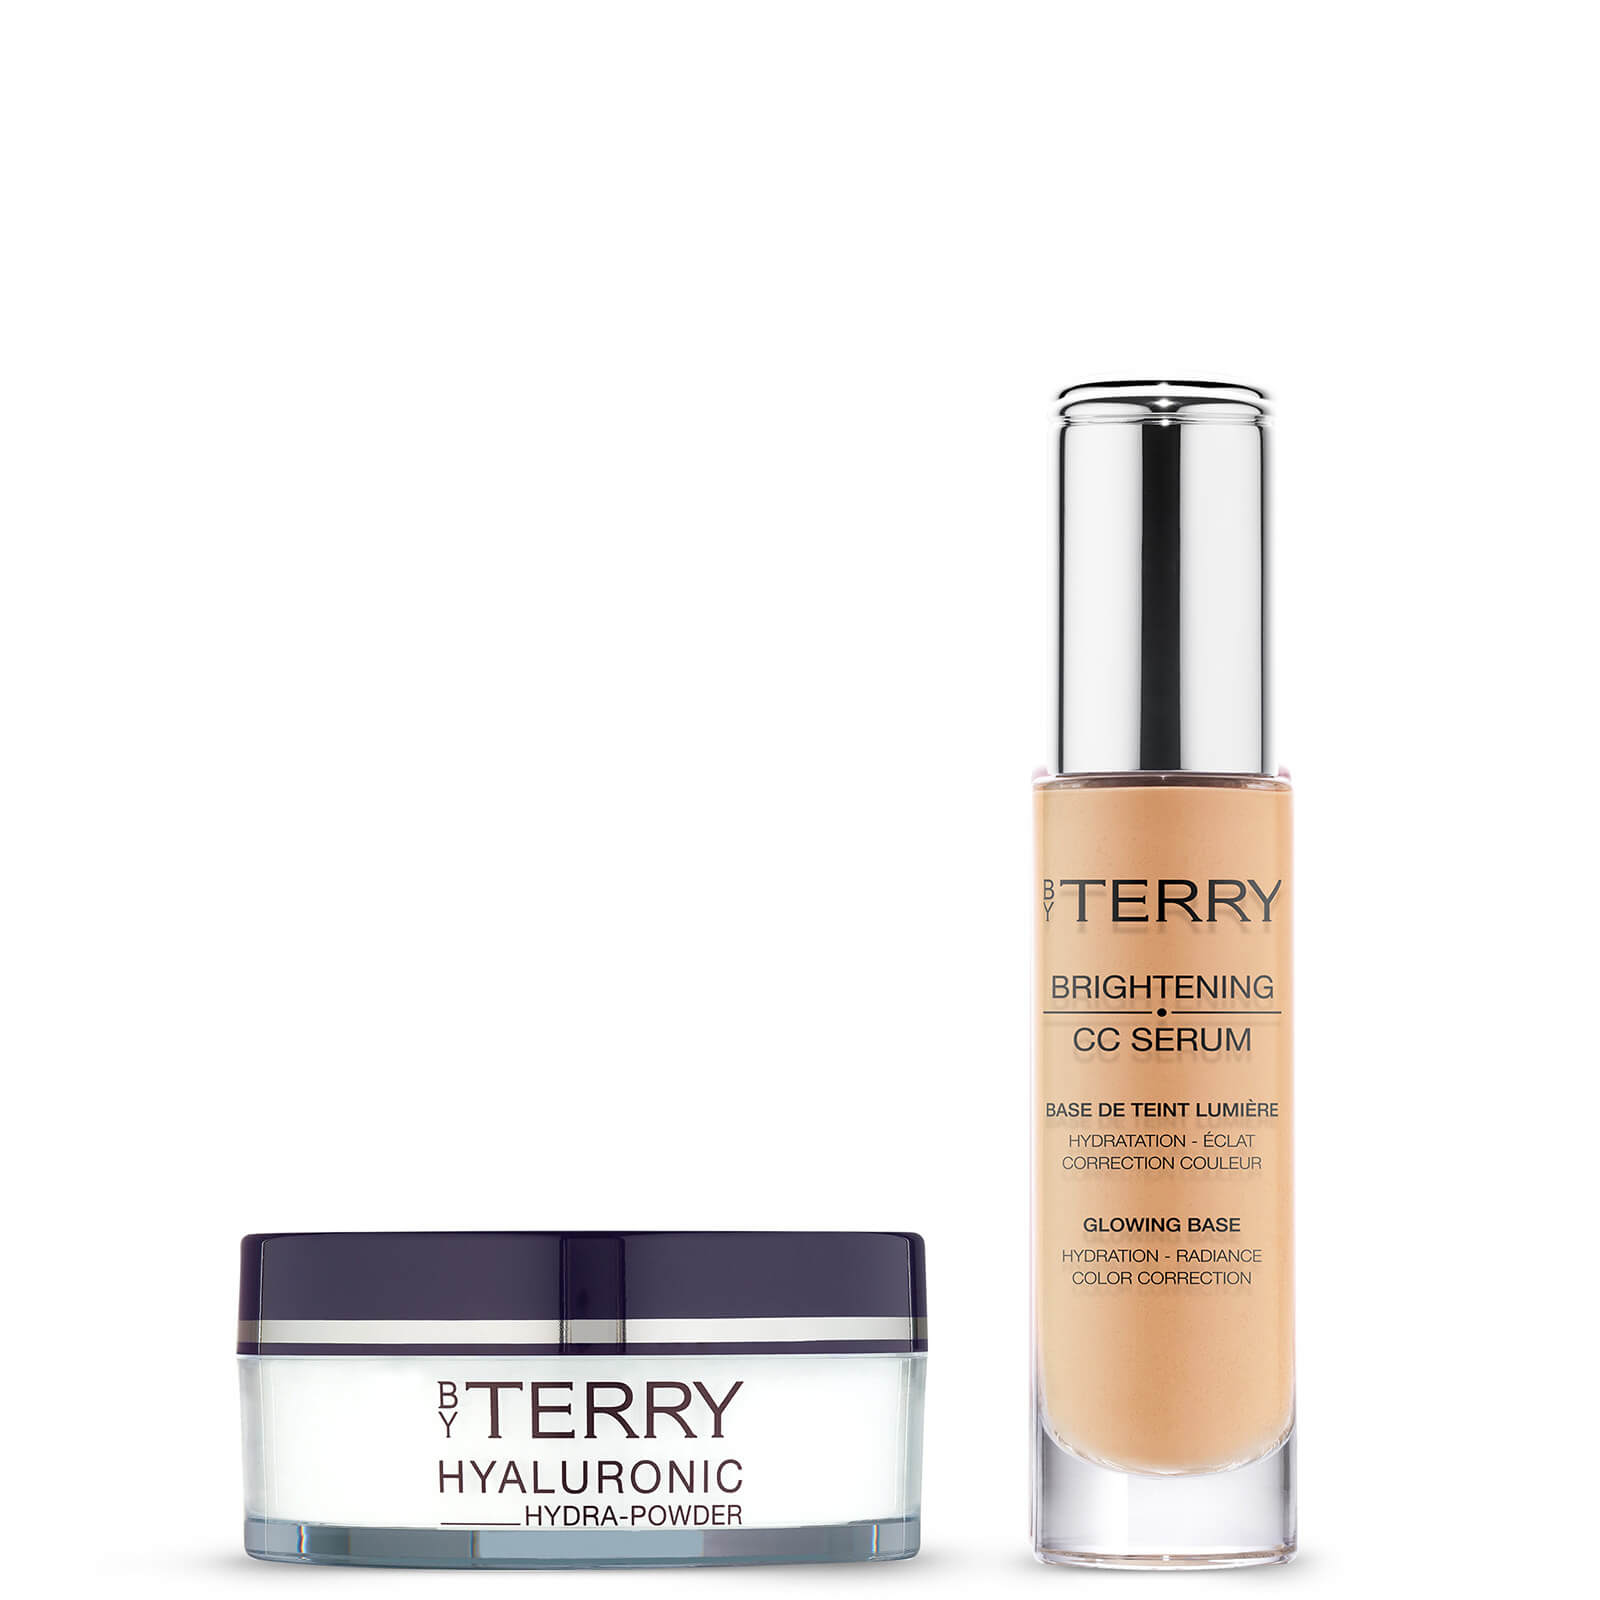 By Terry Hyaluronic Hydra-Powder and Cellularose CC Serum - No.3 Apricot Glow Bundle (Worth £103.00)